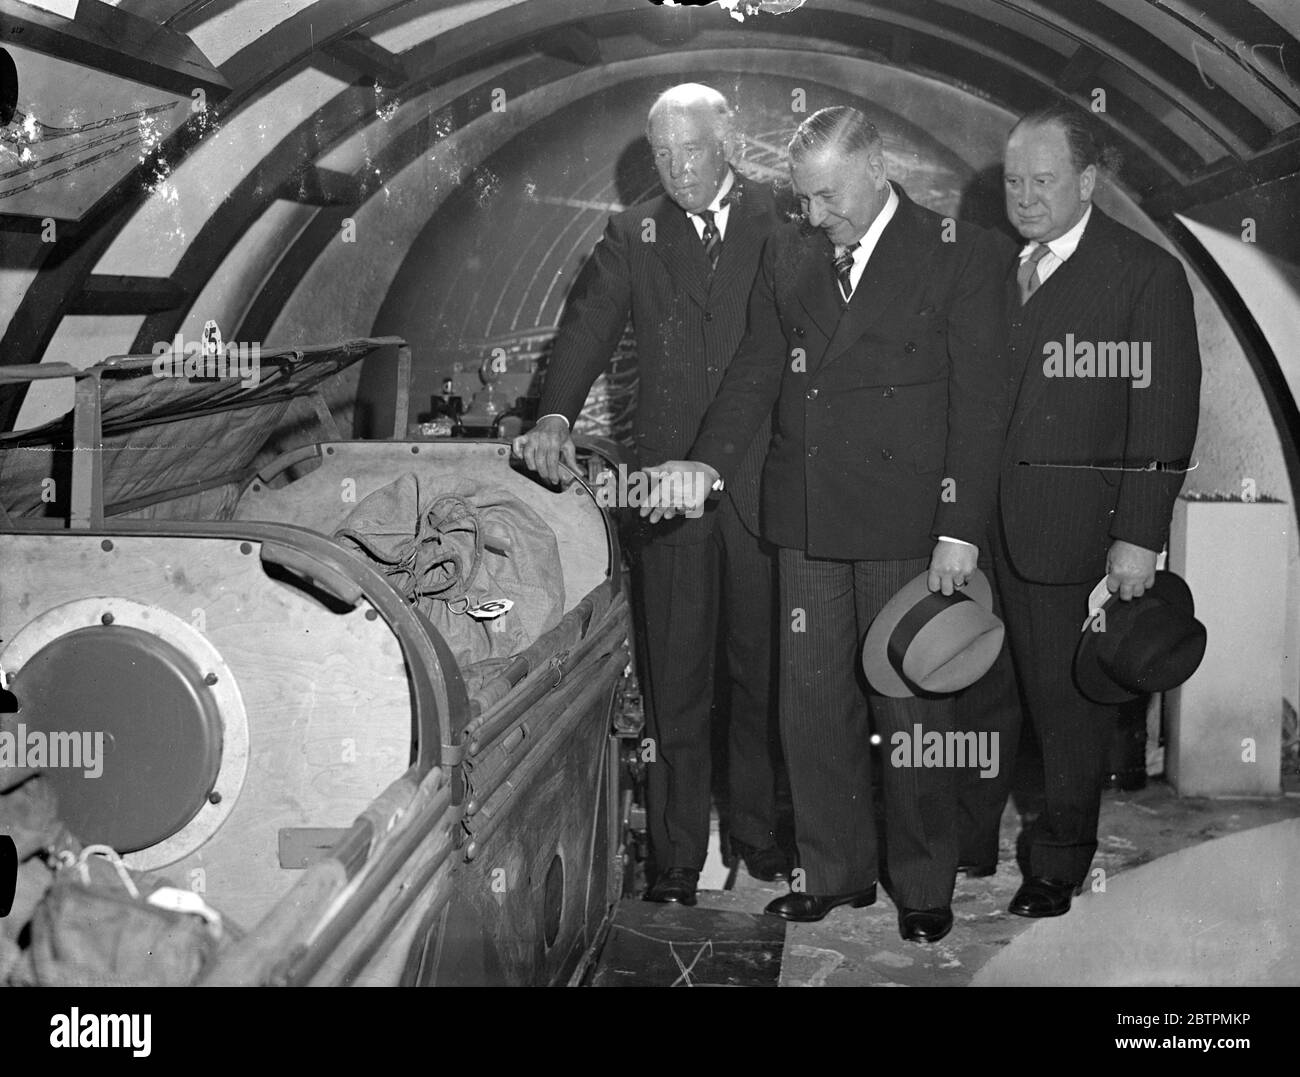 Post office ' s underground railway railway on a view at Charing Cross exhibition . Sir William Crawford opened the post office exhibition in the vestibuls of Charing Cross Underground station . The theme of the exhibition is Post Office services under the surface , on the ground and in the air . Photo shows , left to right , Lord Ashfield head of London Transport , Sir W J Womersley , Assistant Postmaster General and Sir William Crawford inspecting a section of the Post Office tube railway , which together with a replica of one of its stations , is a feature of the exhibition . this railway c Stock Photo